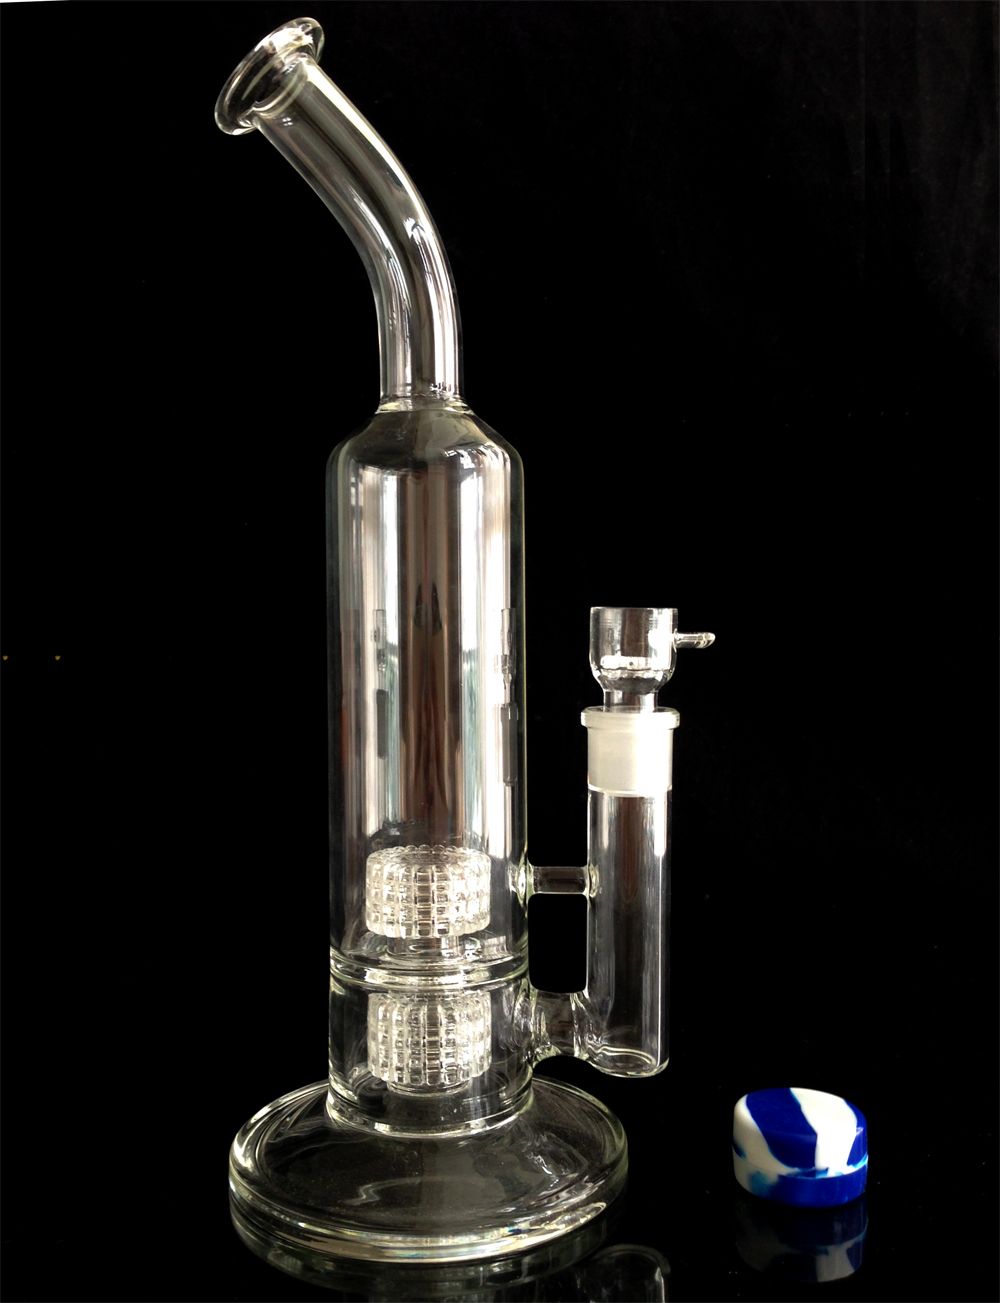 2015-double-birdcages-perc-glass-oil-rig.jpg